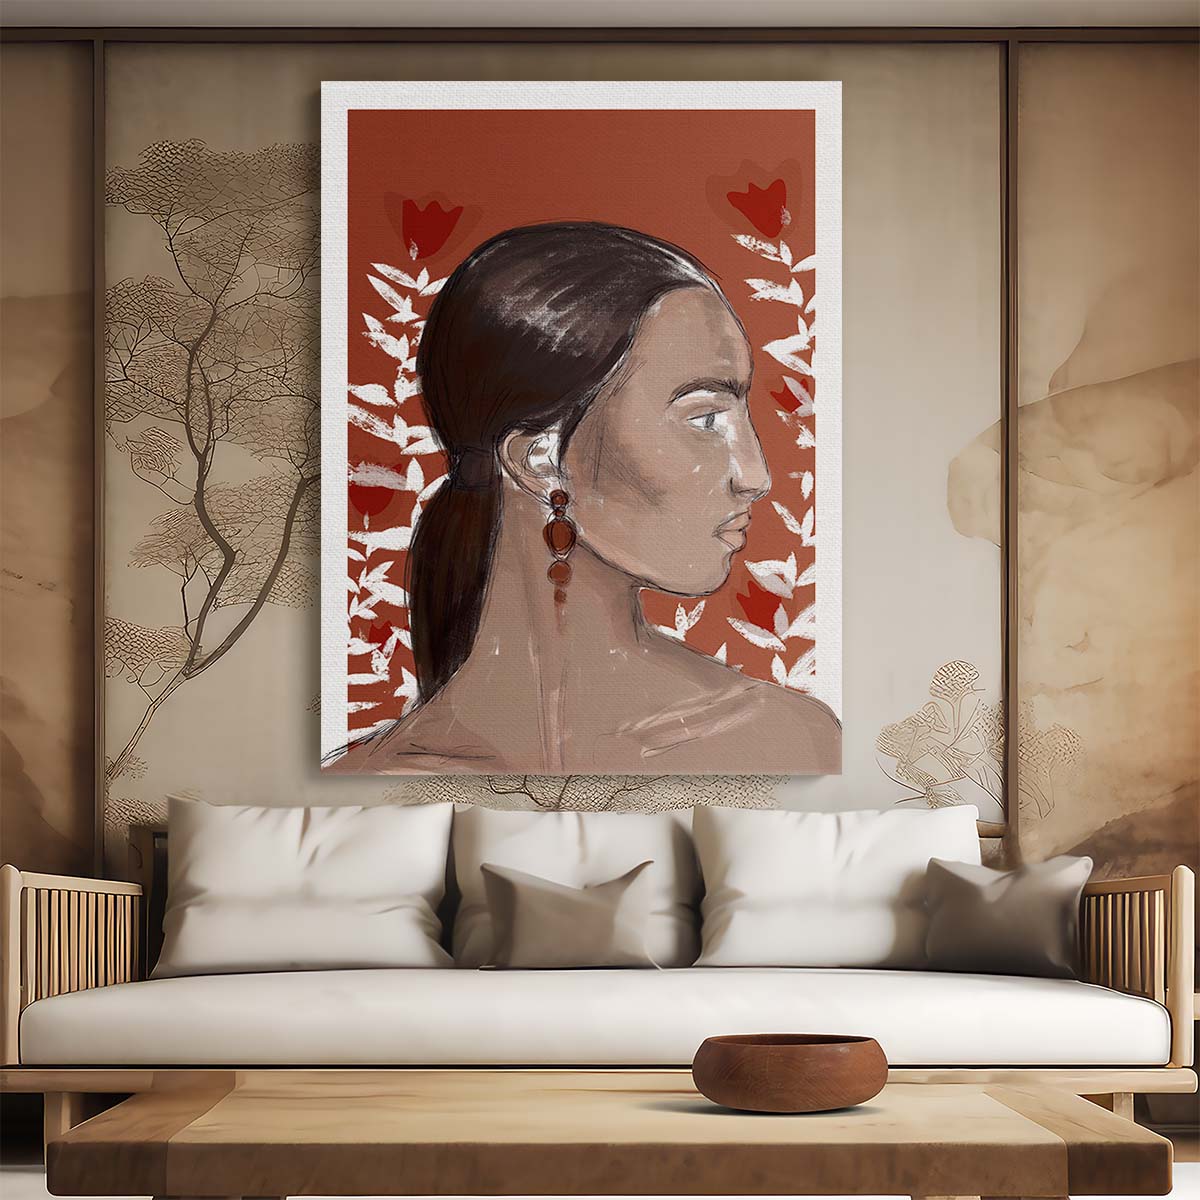 Treechild's Brown Sienna Woman Profile Illustration with Painted Earrings by Luxuriance Designs, made in USA